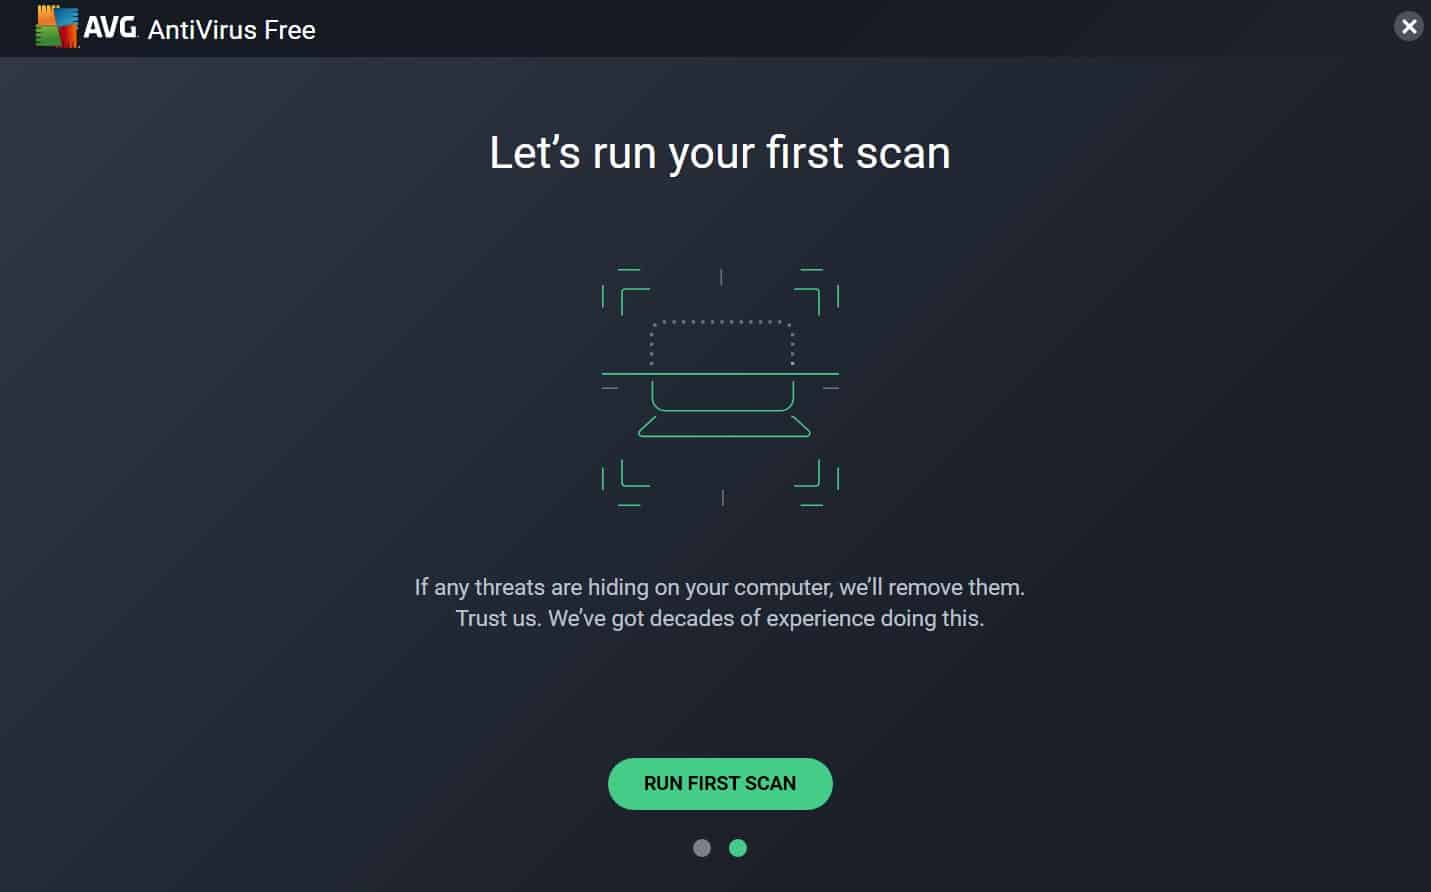 Click on the "Start" or "Scan" button.
Wait for the antivirus software to scan your system.